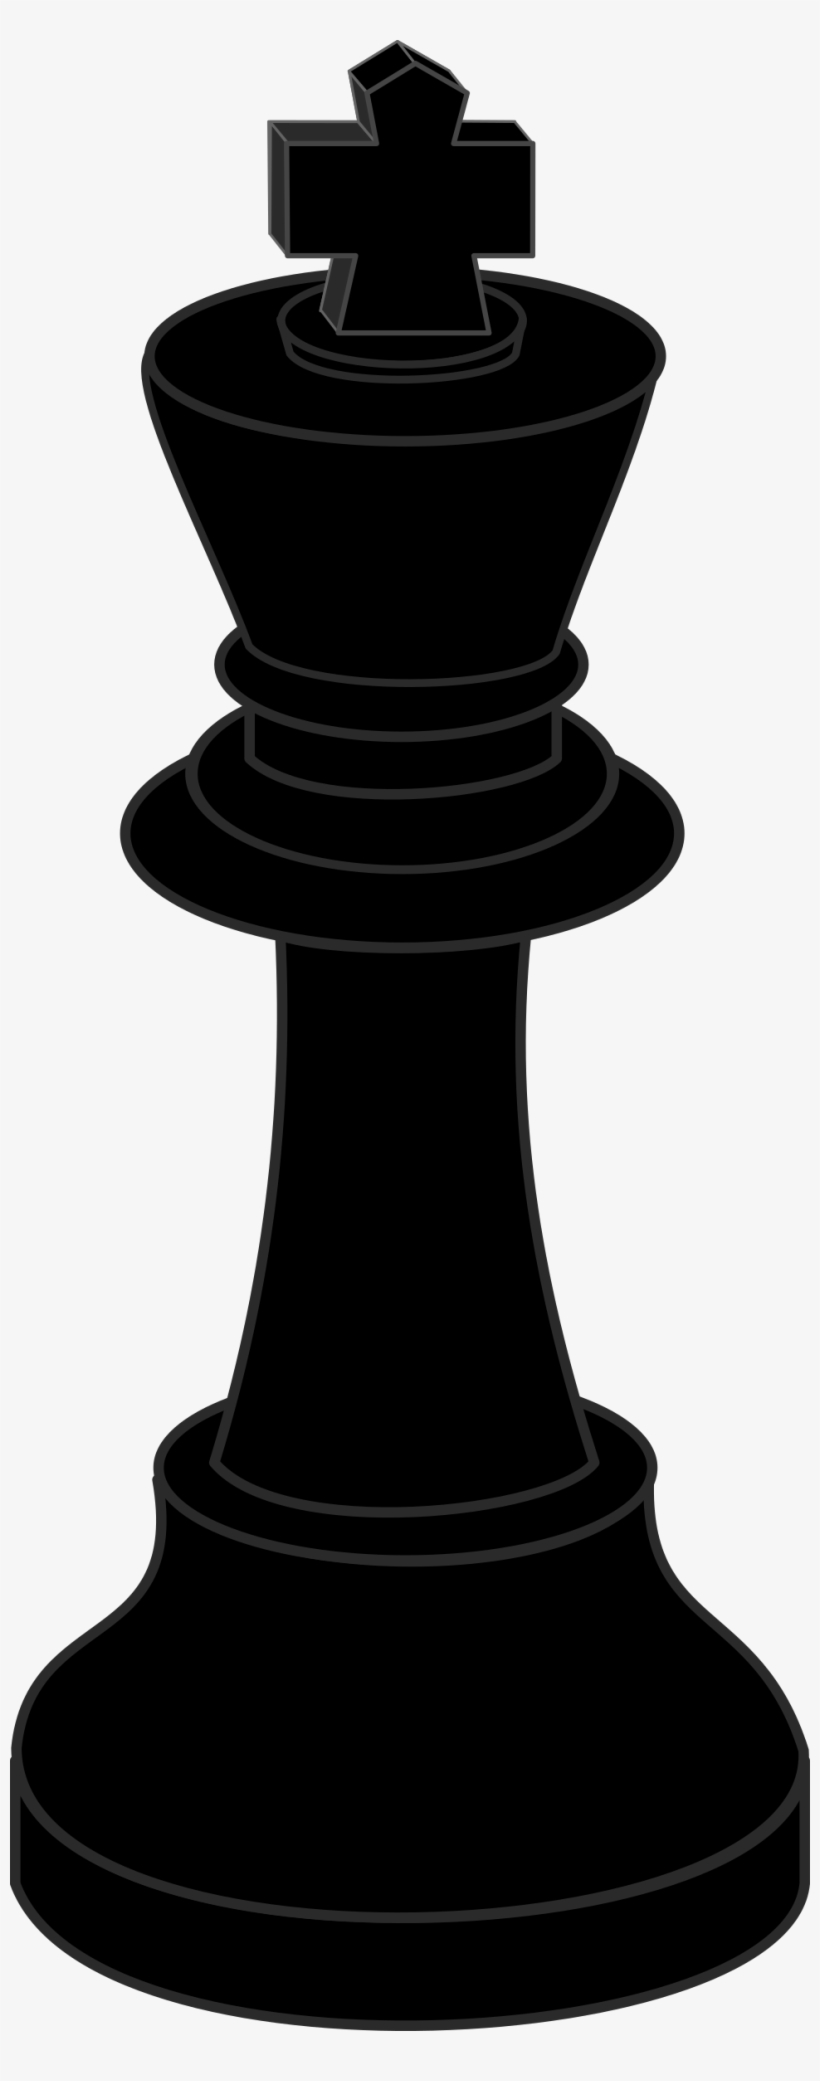 Chess King Cliparts - King Chess Piece Png, transparent png #2191854